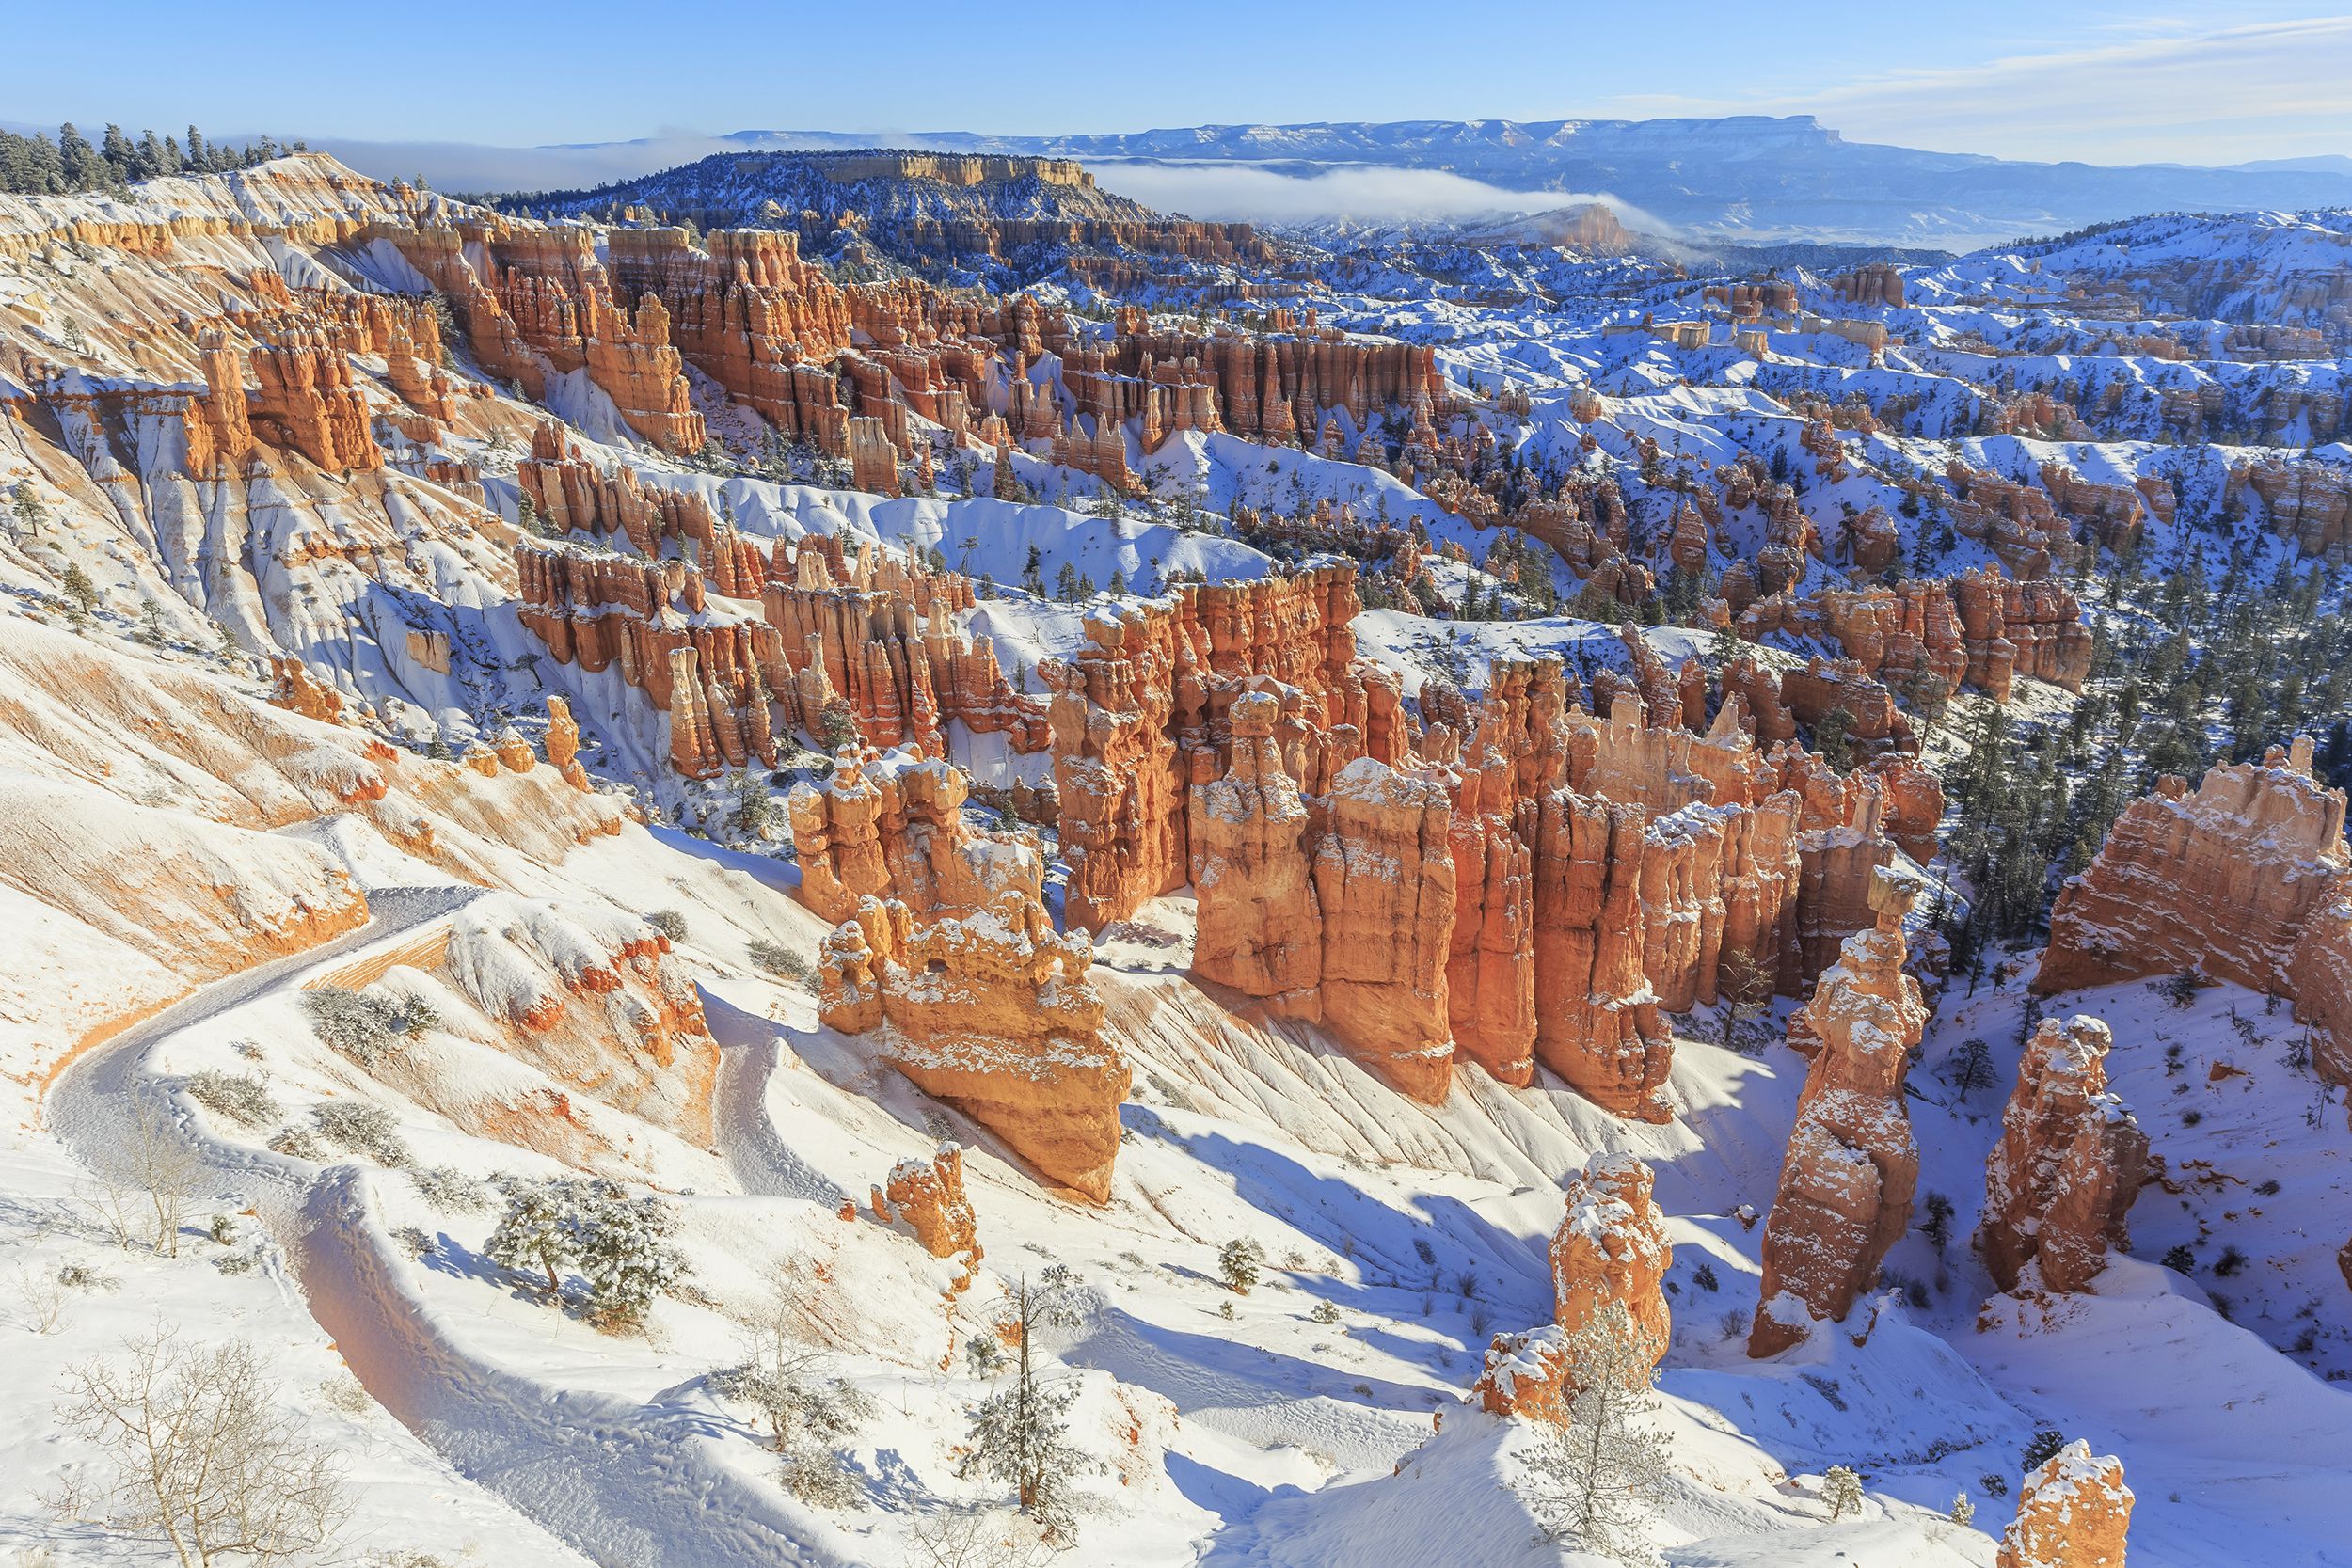 <p><a href="https://www.nps.gov/brca/index.htm">Bryce Canyon National Park</a> is unique for its geological structures, including gigantic natural amphitheatres and orangish rock spires called hoodoos. In winter, temperatures in the park average around freezing, but there are also fewer crowds there then. Visitors can enjoy skiing, snowshoeing, hiking, sightseeing and stargazing. Note: The canyon sits 9,000 feet above sea level, so altitude sickness is a potential problem.</p><p><b>Related:</b> <a href="https://blog.cheapism.com/vintage-national-park-photos/">33 Historic National Park Photos for Vintage Views</a></p>